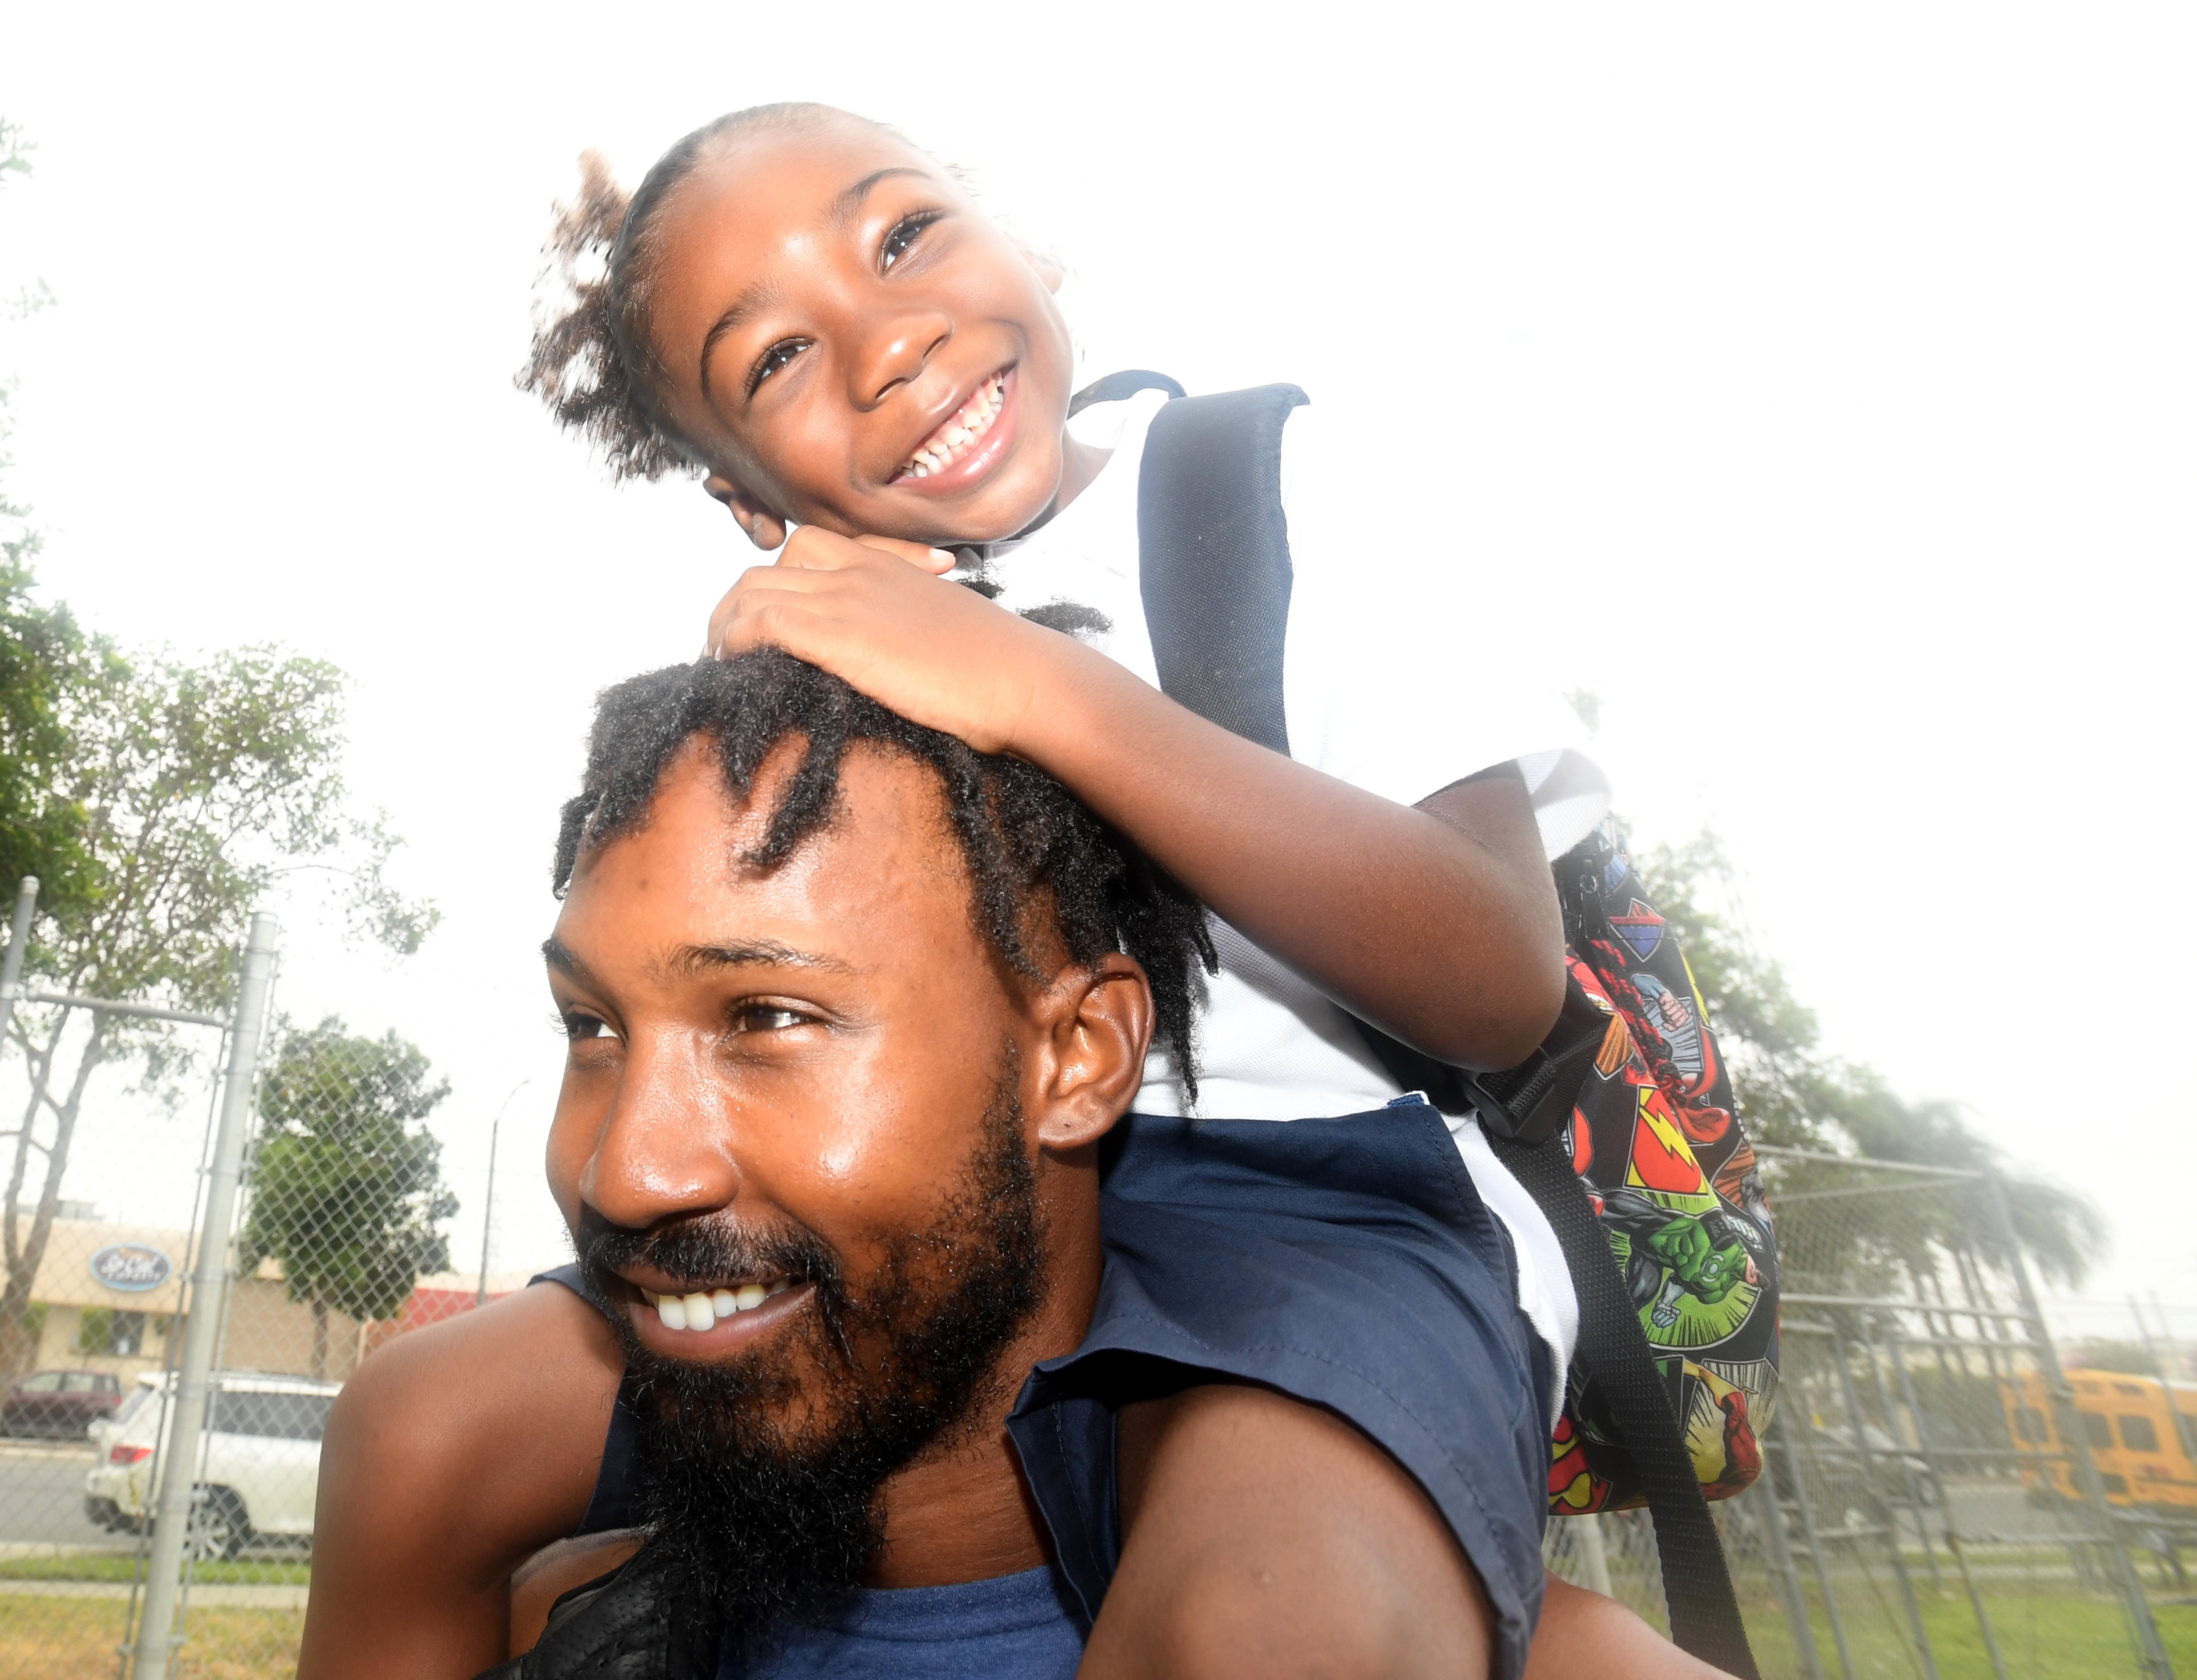 Kal-El Mulkey-Hiriams is all smiles on his dads shoulders and ready for the first day of kindergarten at McKinley Elementary School in Long Beach on Wednesday, August 28, 2019.|Photo: Getty Images